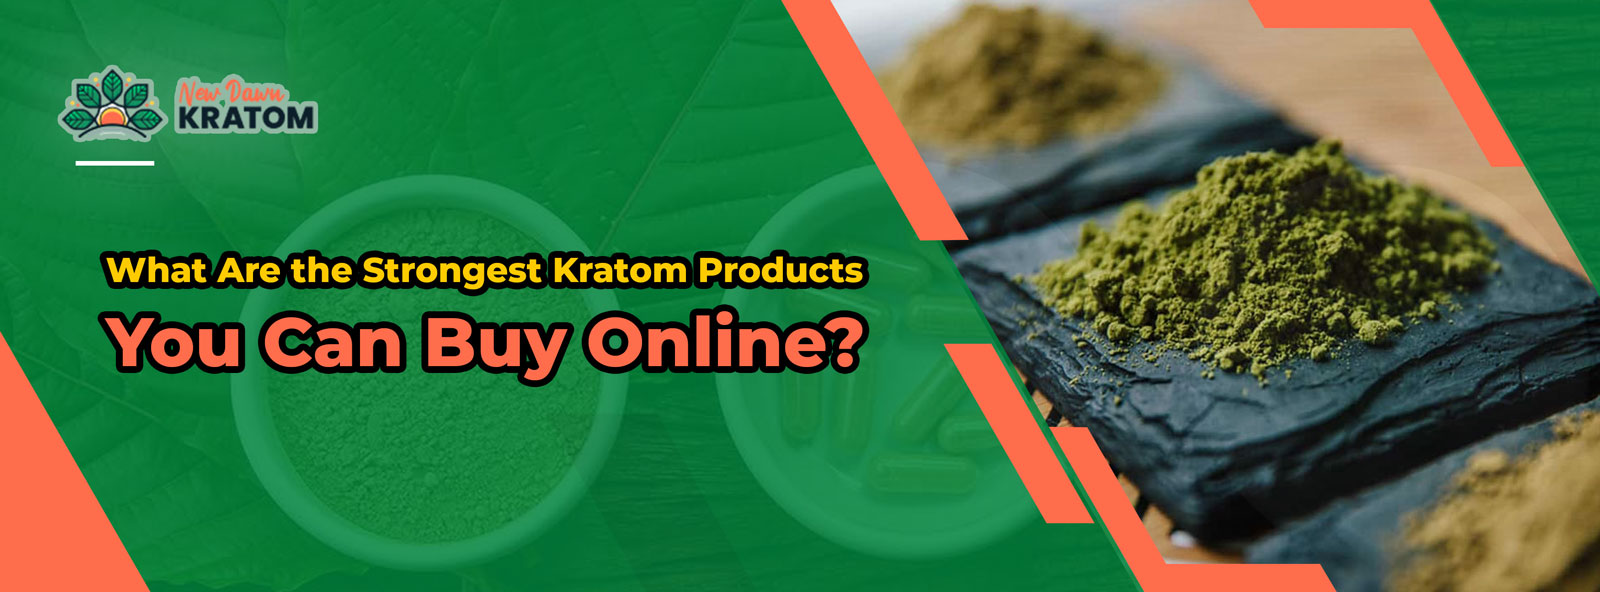 what are the strongest kratom products you can buy online?